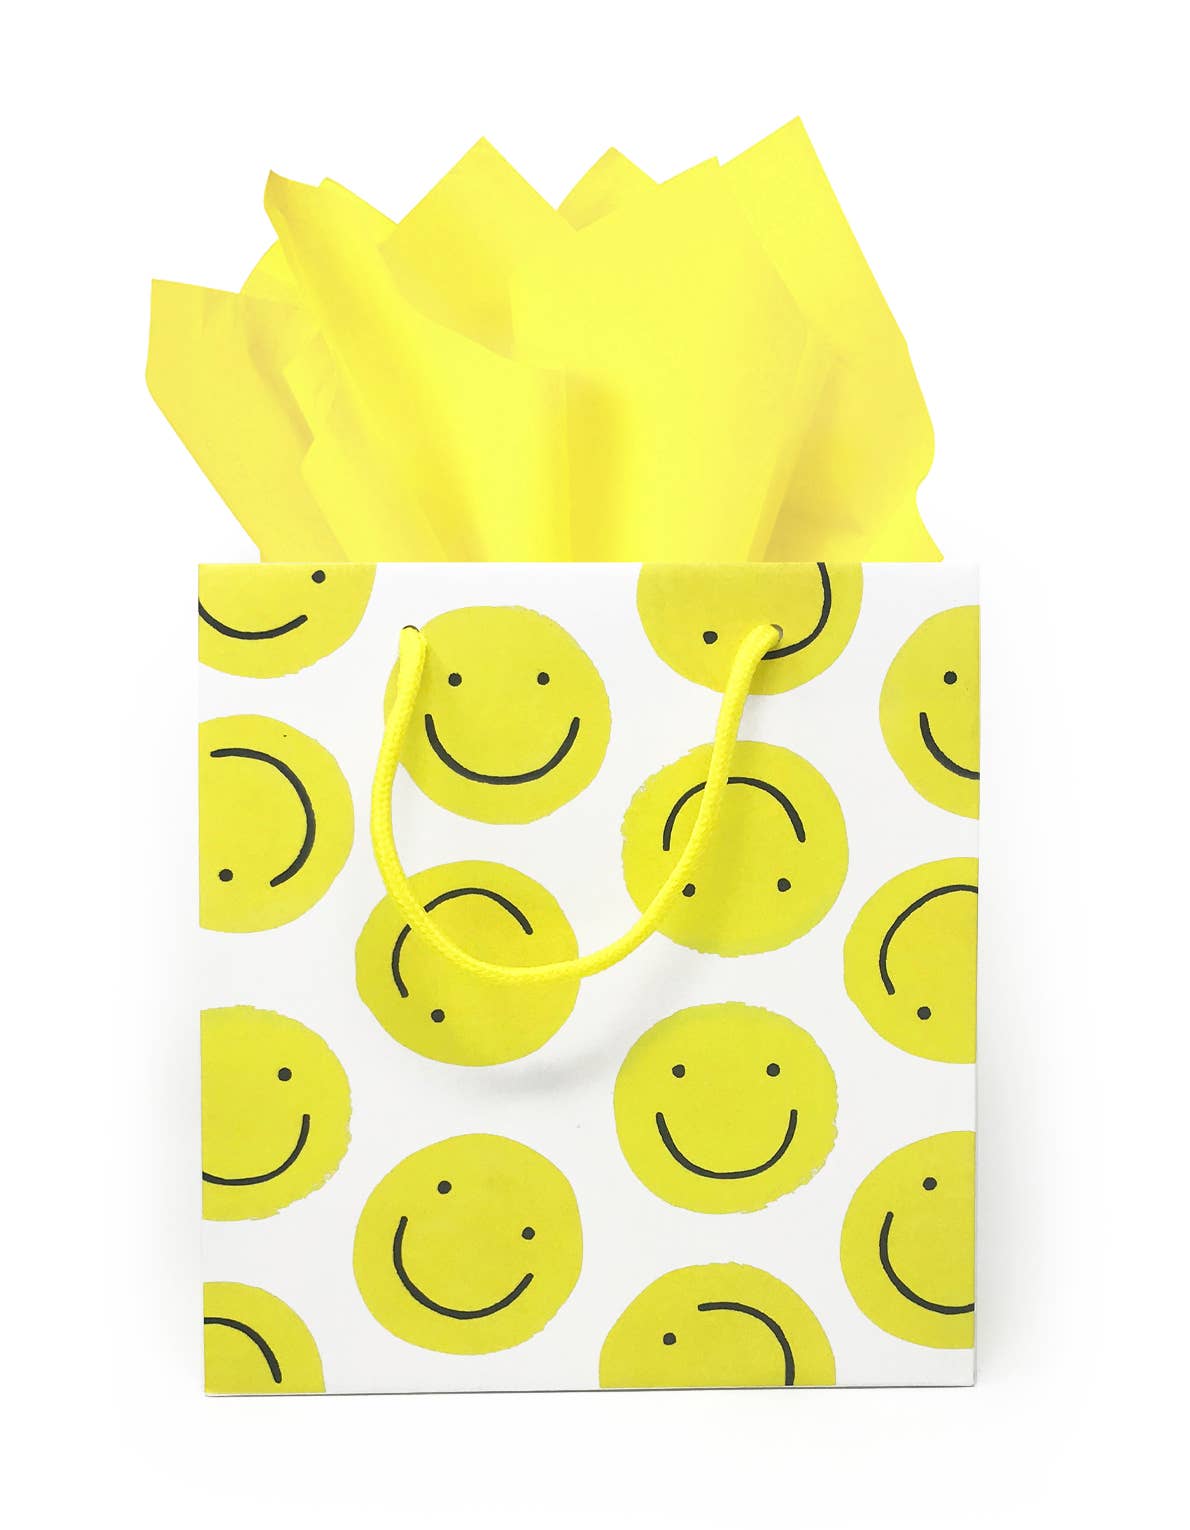 Smiley Face Gift Bag - Medium Sized Gift Bags